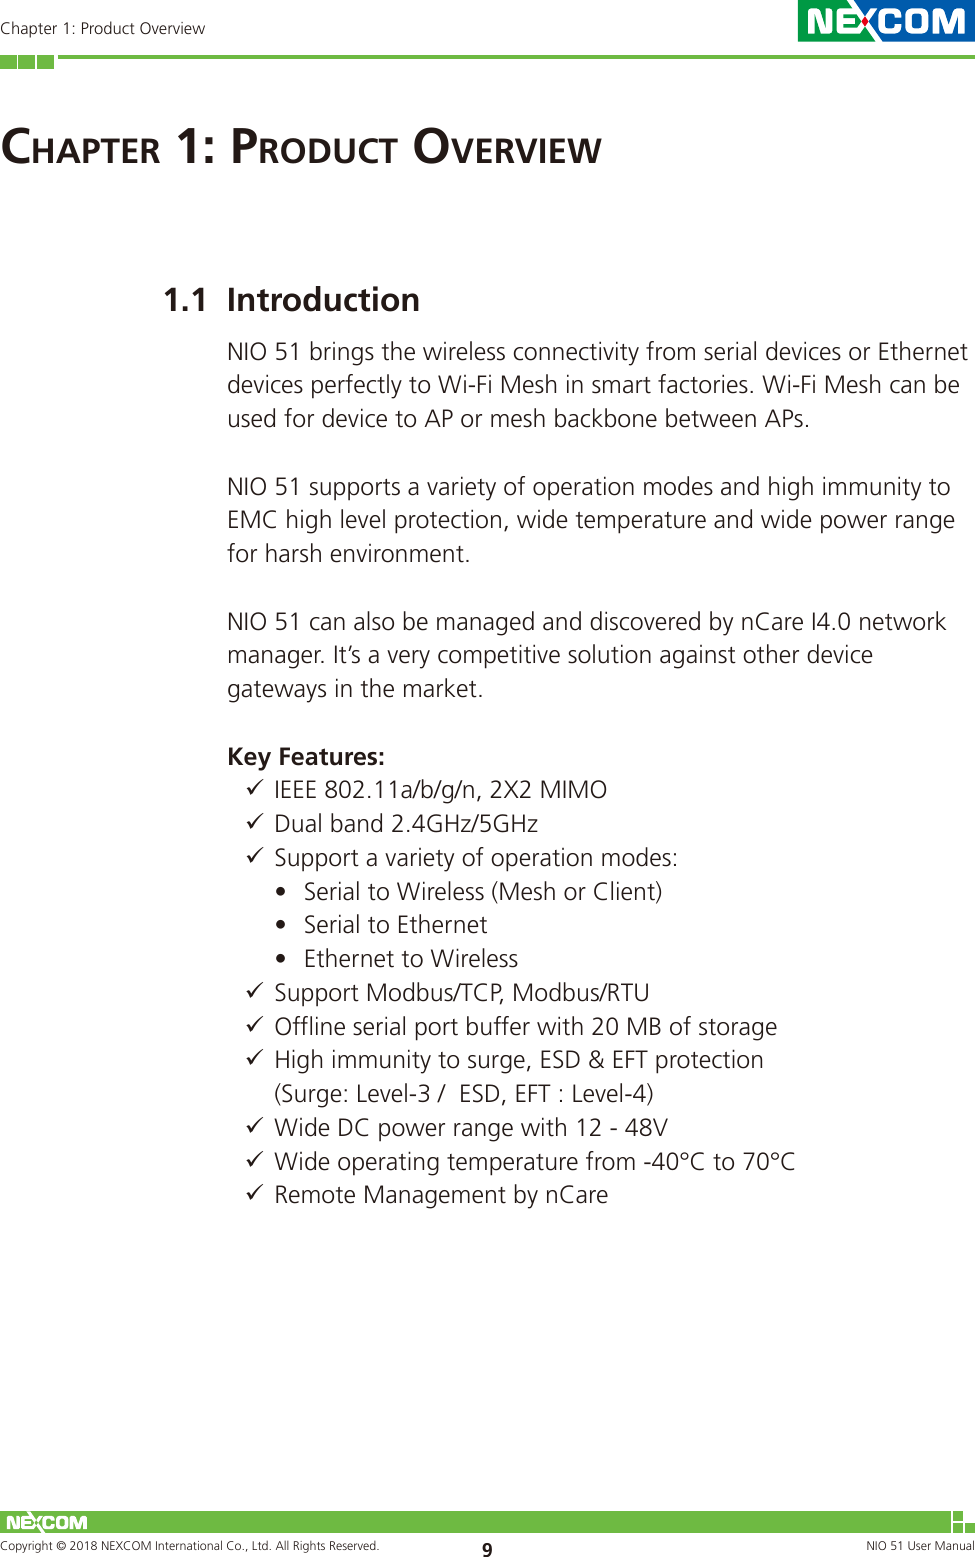 Copyright © 2018 NEXCOM International Co., Ltd. All Rights Reserved. NIO 51 User Manual 9Chapter 1: Product OverviewChaPter 1: ProduCt overview1.1  IntroductionNIO 51 brings the wireless connectivity from serial devices or Ethernet devices perfectly to Wi-Fi Mesh in smart factories. Wi-Fi Mesh can be used for device to AP or mesh backbone between APs.NIO 51 supports a variety of operation modes and high immunity to EMC high level protection, wide temperature and wide power range for harsh environment. NIO 51 can also be managed and discovered by nCare I4.0 network manager. It’s a very competitive solution against other device gateways in the market.Key Features: 9IEEE 802.11a/b/g/n, 2X2 MIMO 9 Dual band 2.4GHz/5GHz 9 Support a variety of operation modes: •  Serial to Wireless (Mesh or Client)•  Serial to Ethernet•  Ethernet to Wireless  9 Support Modbus/TCP, Modbus/RTU 9 Offline serial port buffer with 20 MB of storage 9 High immunity to surge, ESD &amp; EFT protection                        (Surge: Level-3 /  ESD, EFT : Level-4)  9 Wide DC power range with 12 - 48V 9 Wide operating temperature from -40°C to 70°C 9 Remote Management by nCare